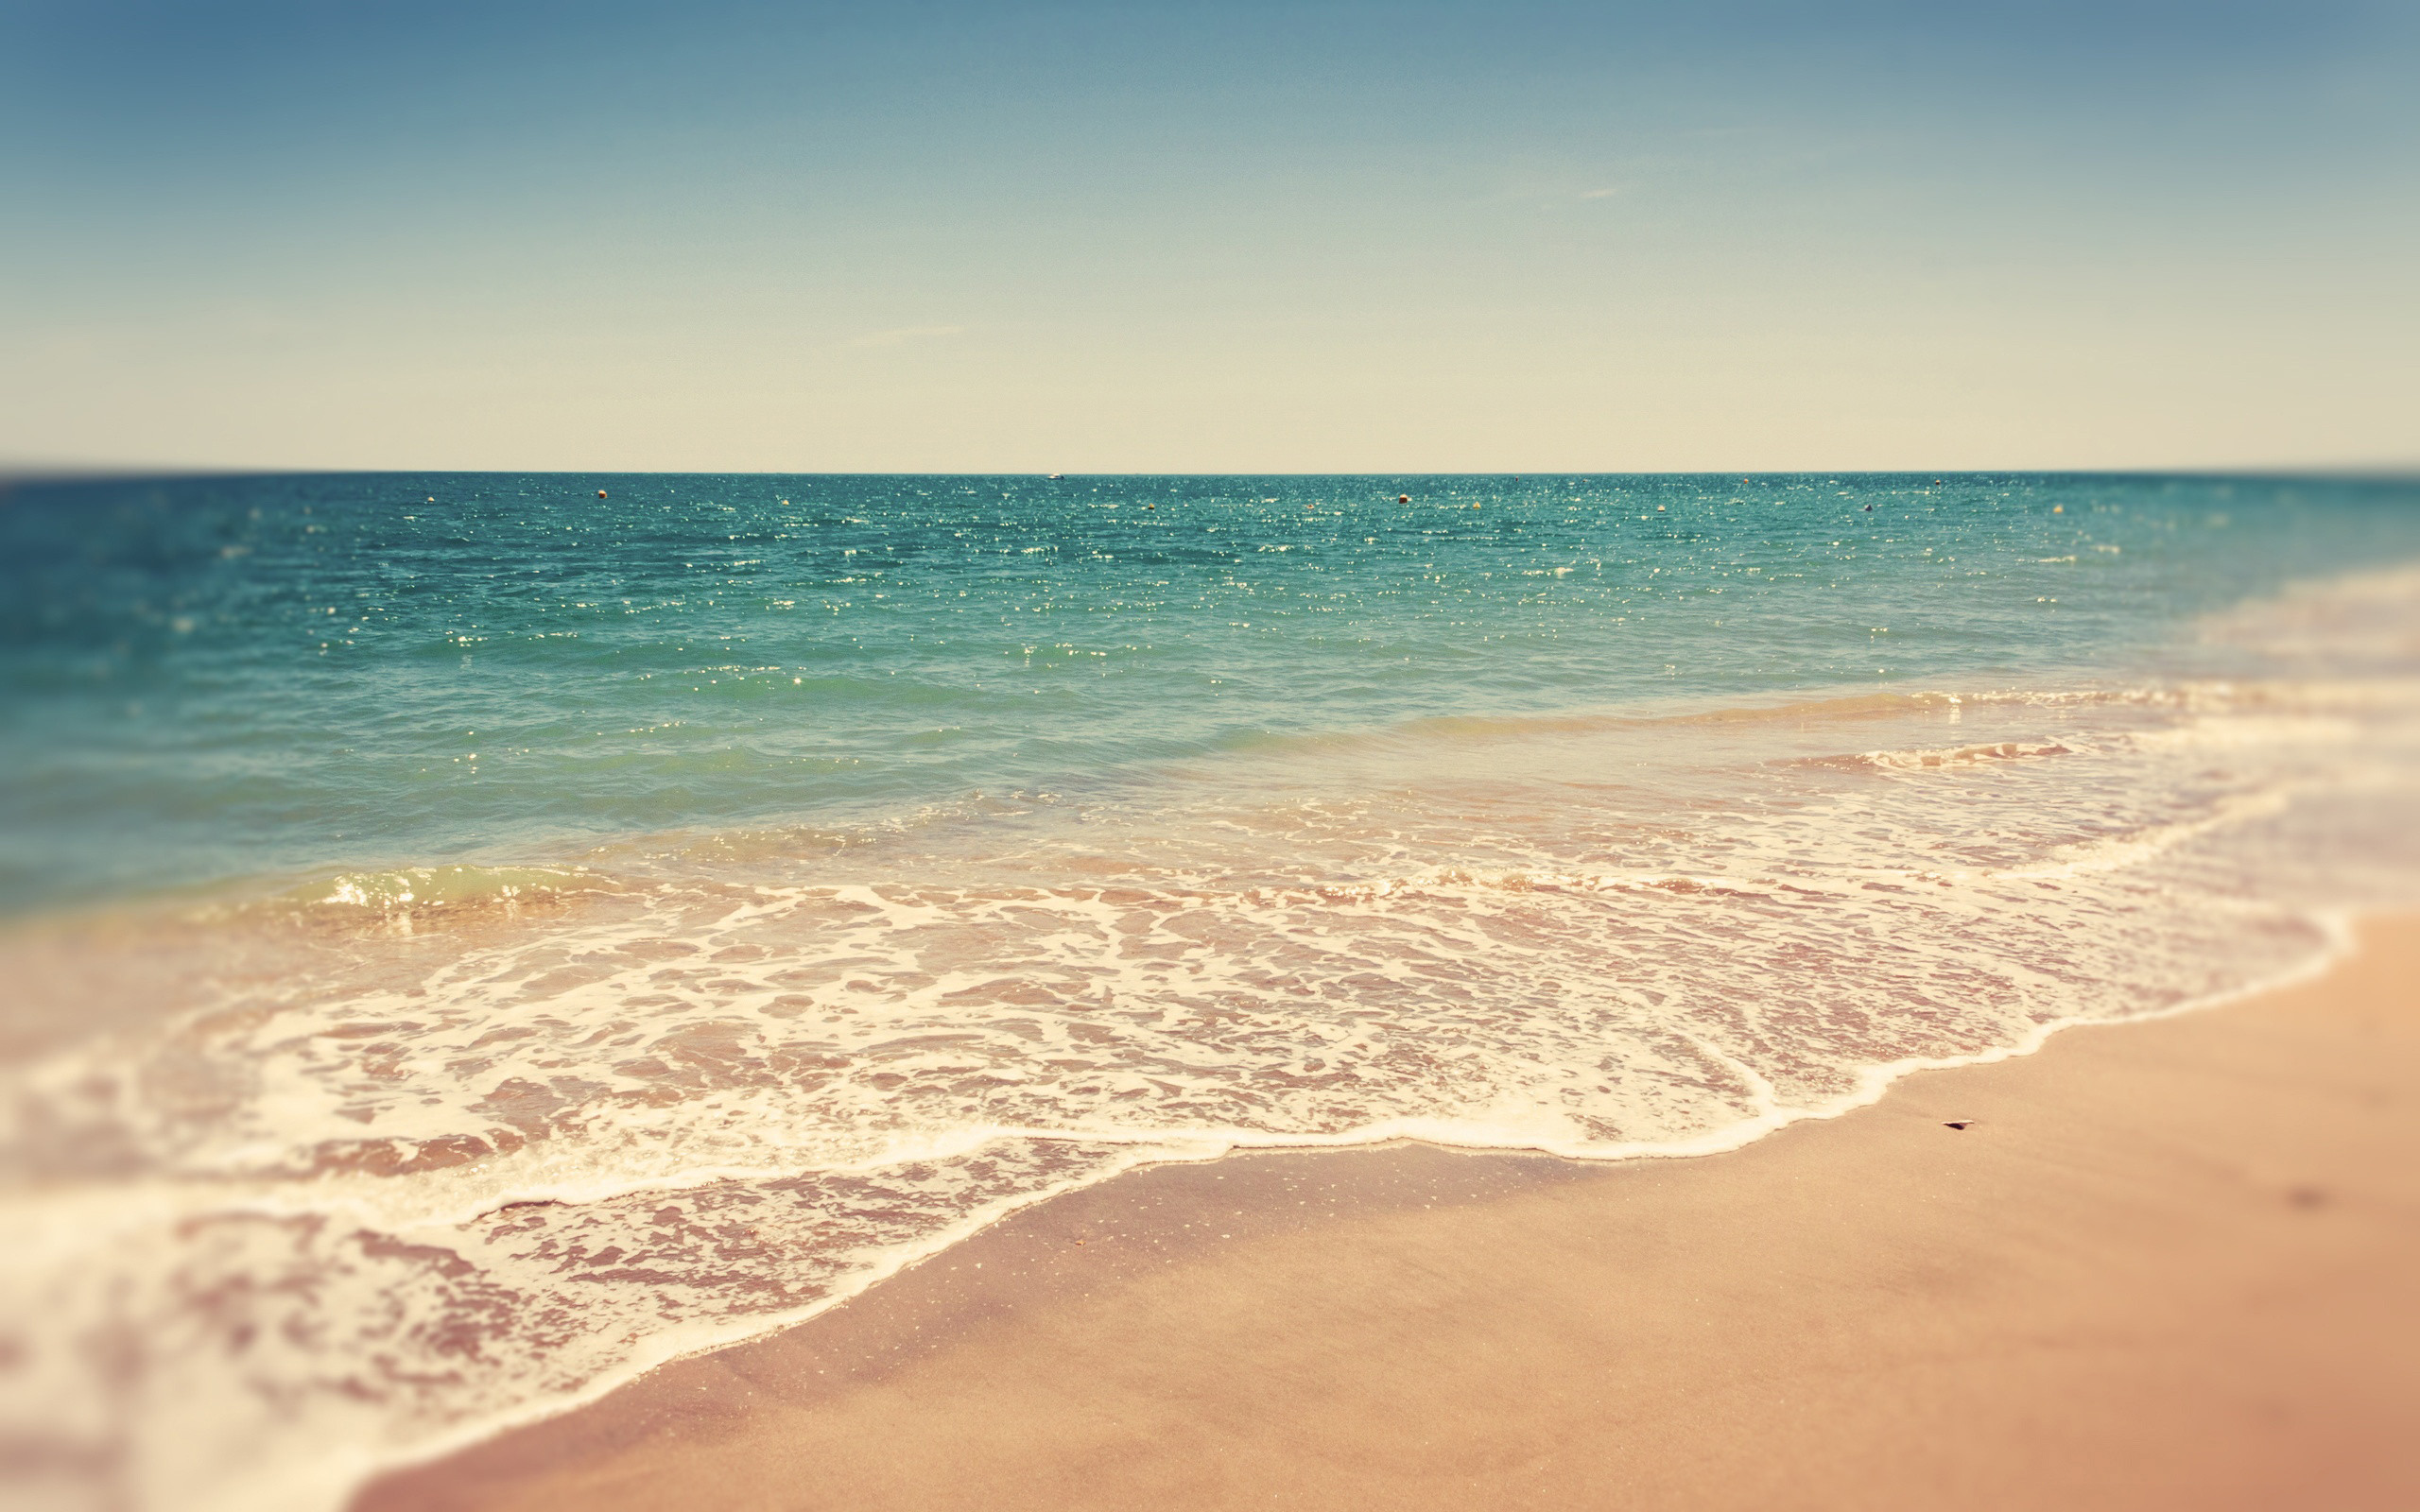 2560x1600 Website for free backgrounds! - retro summer beach